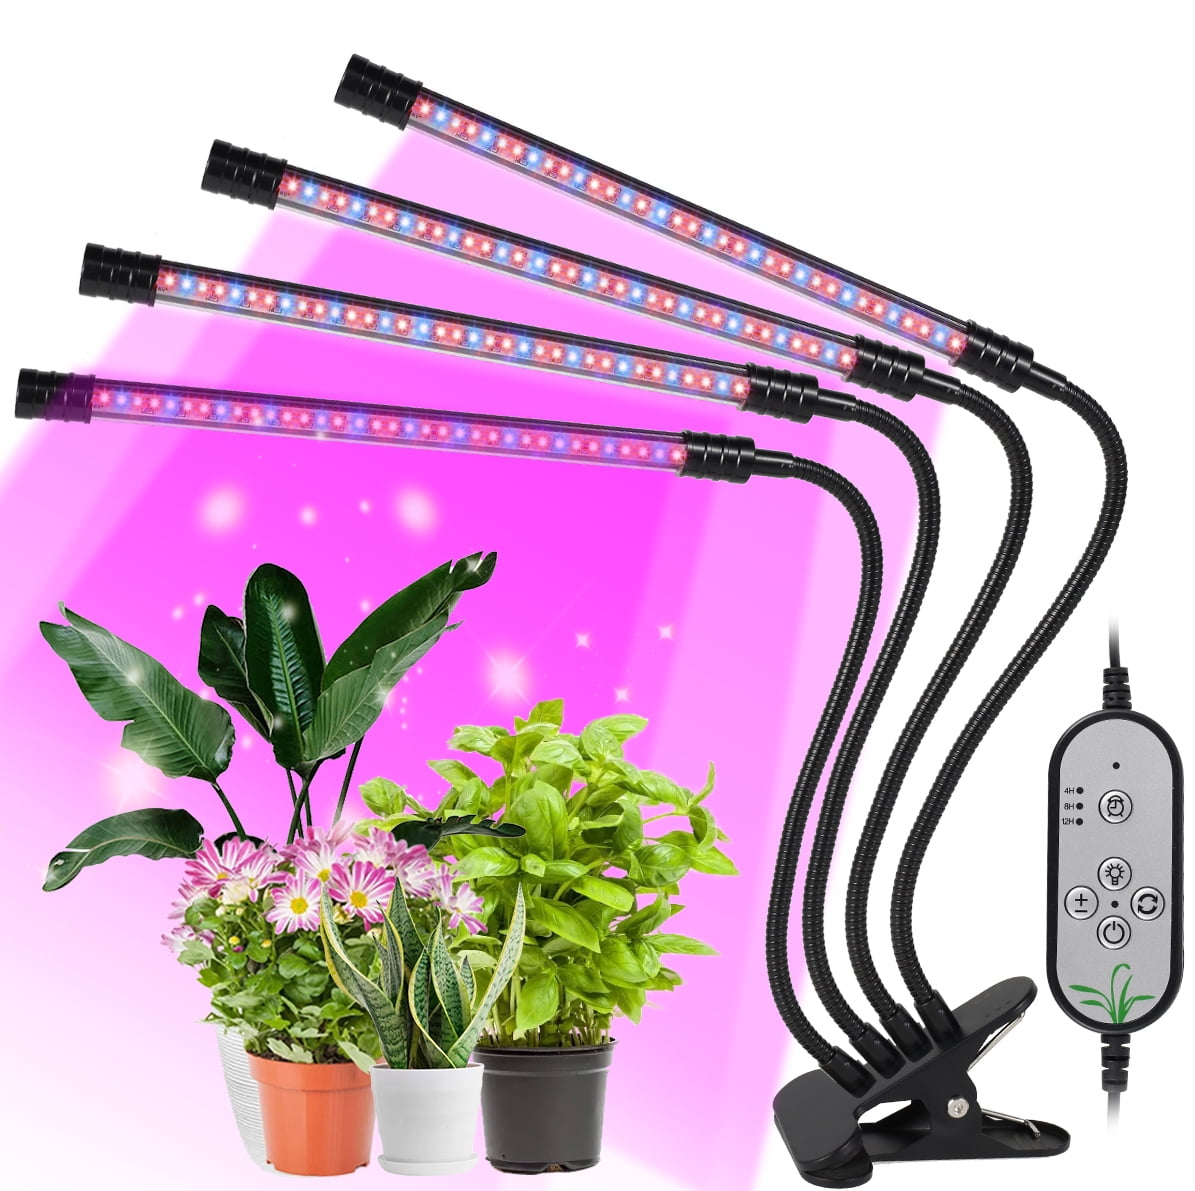 2 Head 36 LEDs Plant Light 360° Flexible Adjustable Full Spectrum Plant Grow Lamp for Seedling USB Grow Lamp with 4//8//12H Timer,5 Dimmable Brightness /& 3 Color Mode Led Grow Light for Indoor Plants